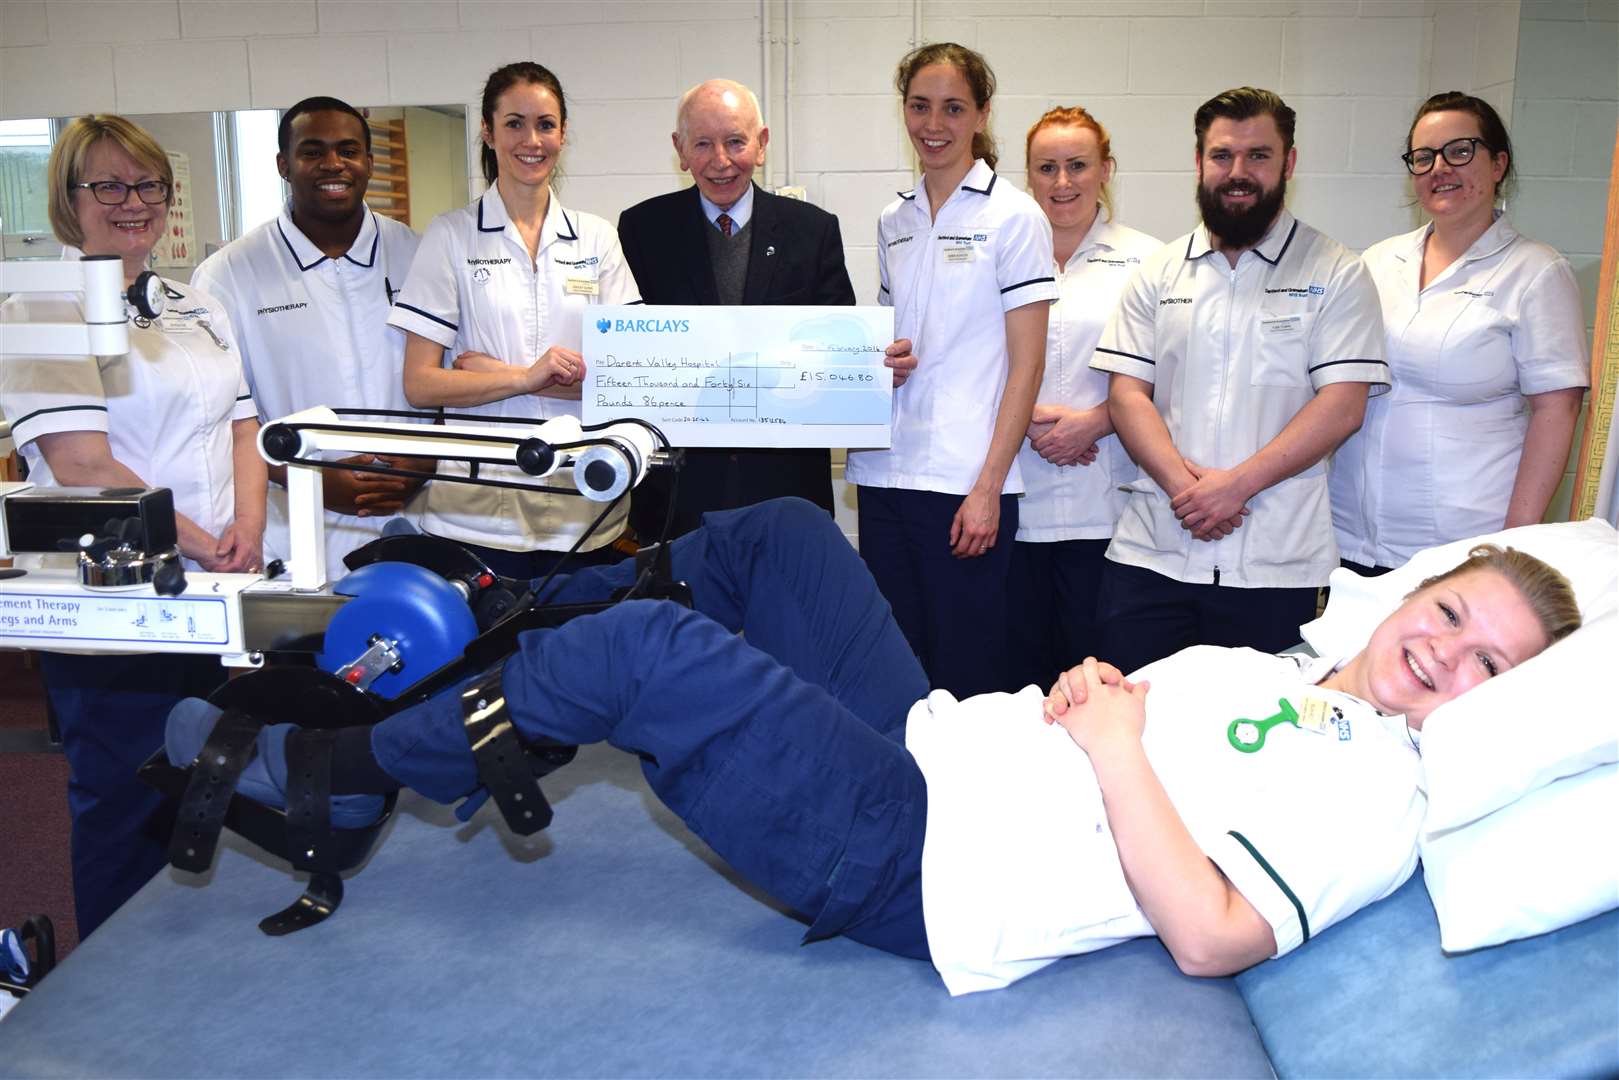 John Surtees CBE arranged a pit stop at Darent Valley Hospital to present a cheque for £15,046.80.